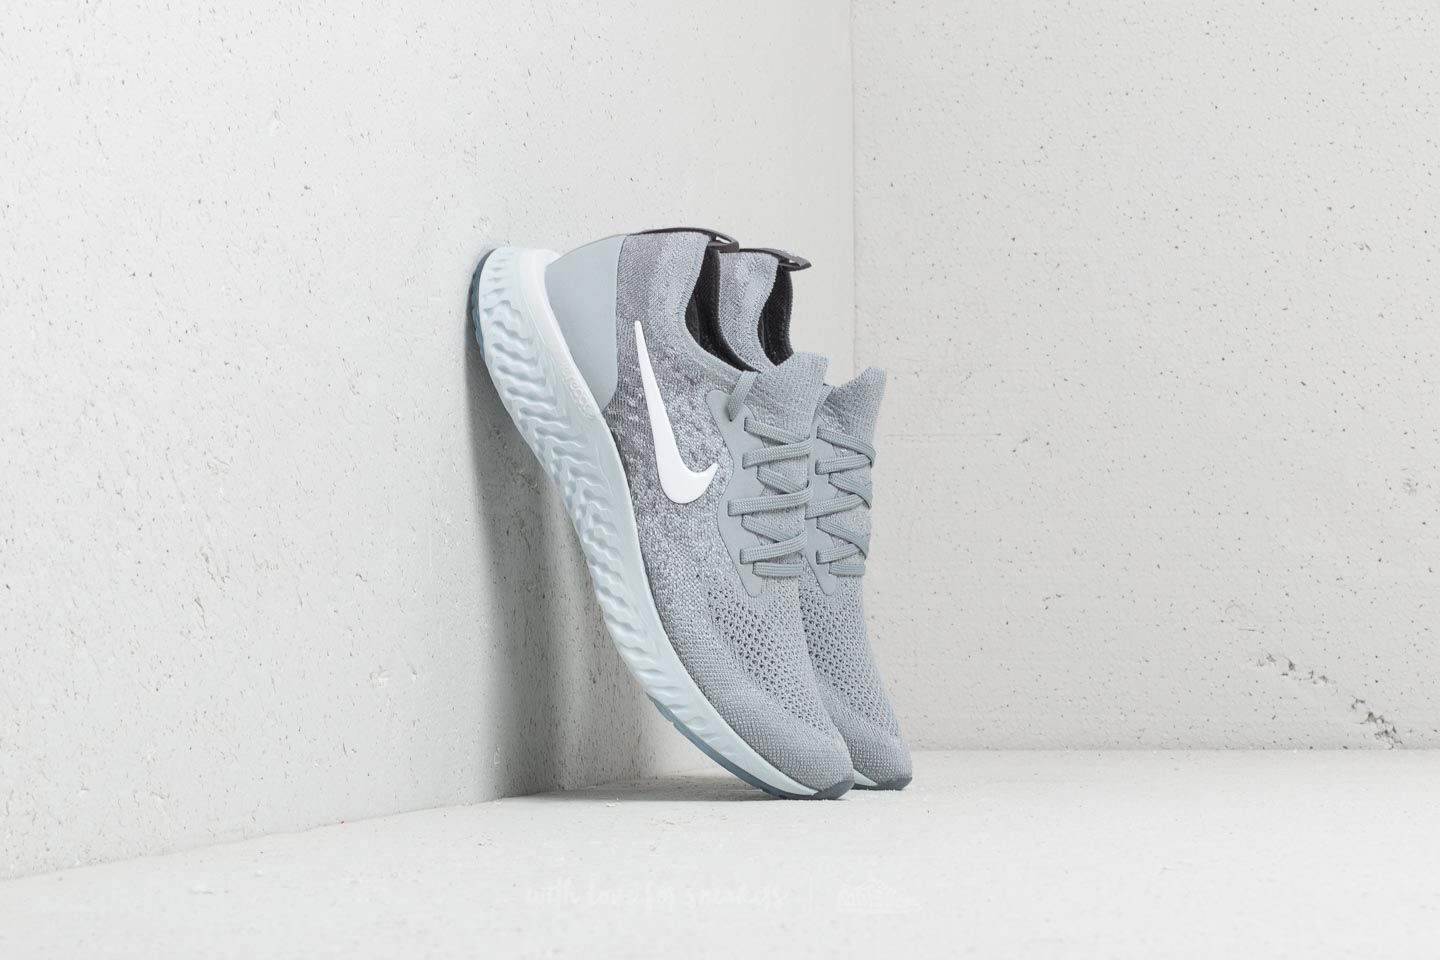 Chaussures et baskets femme Nike Epic React Flyknit (GS) Wolf Grey/ White-Cool Grey